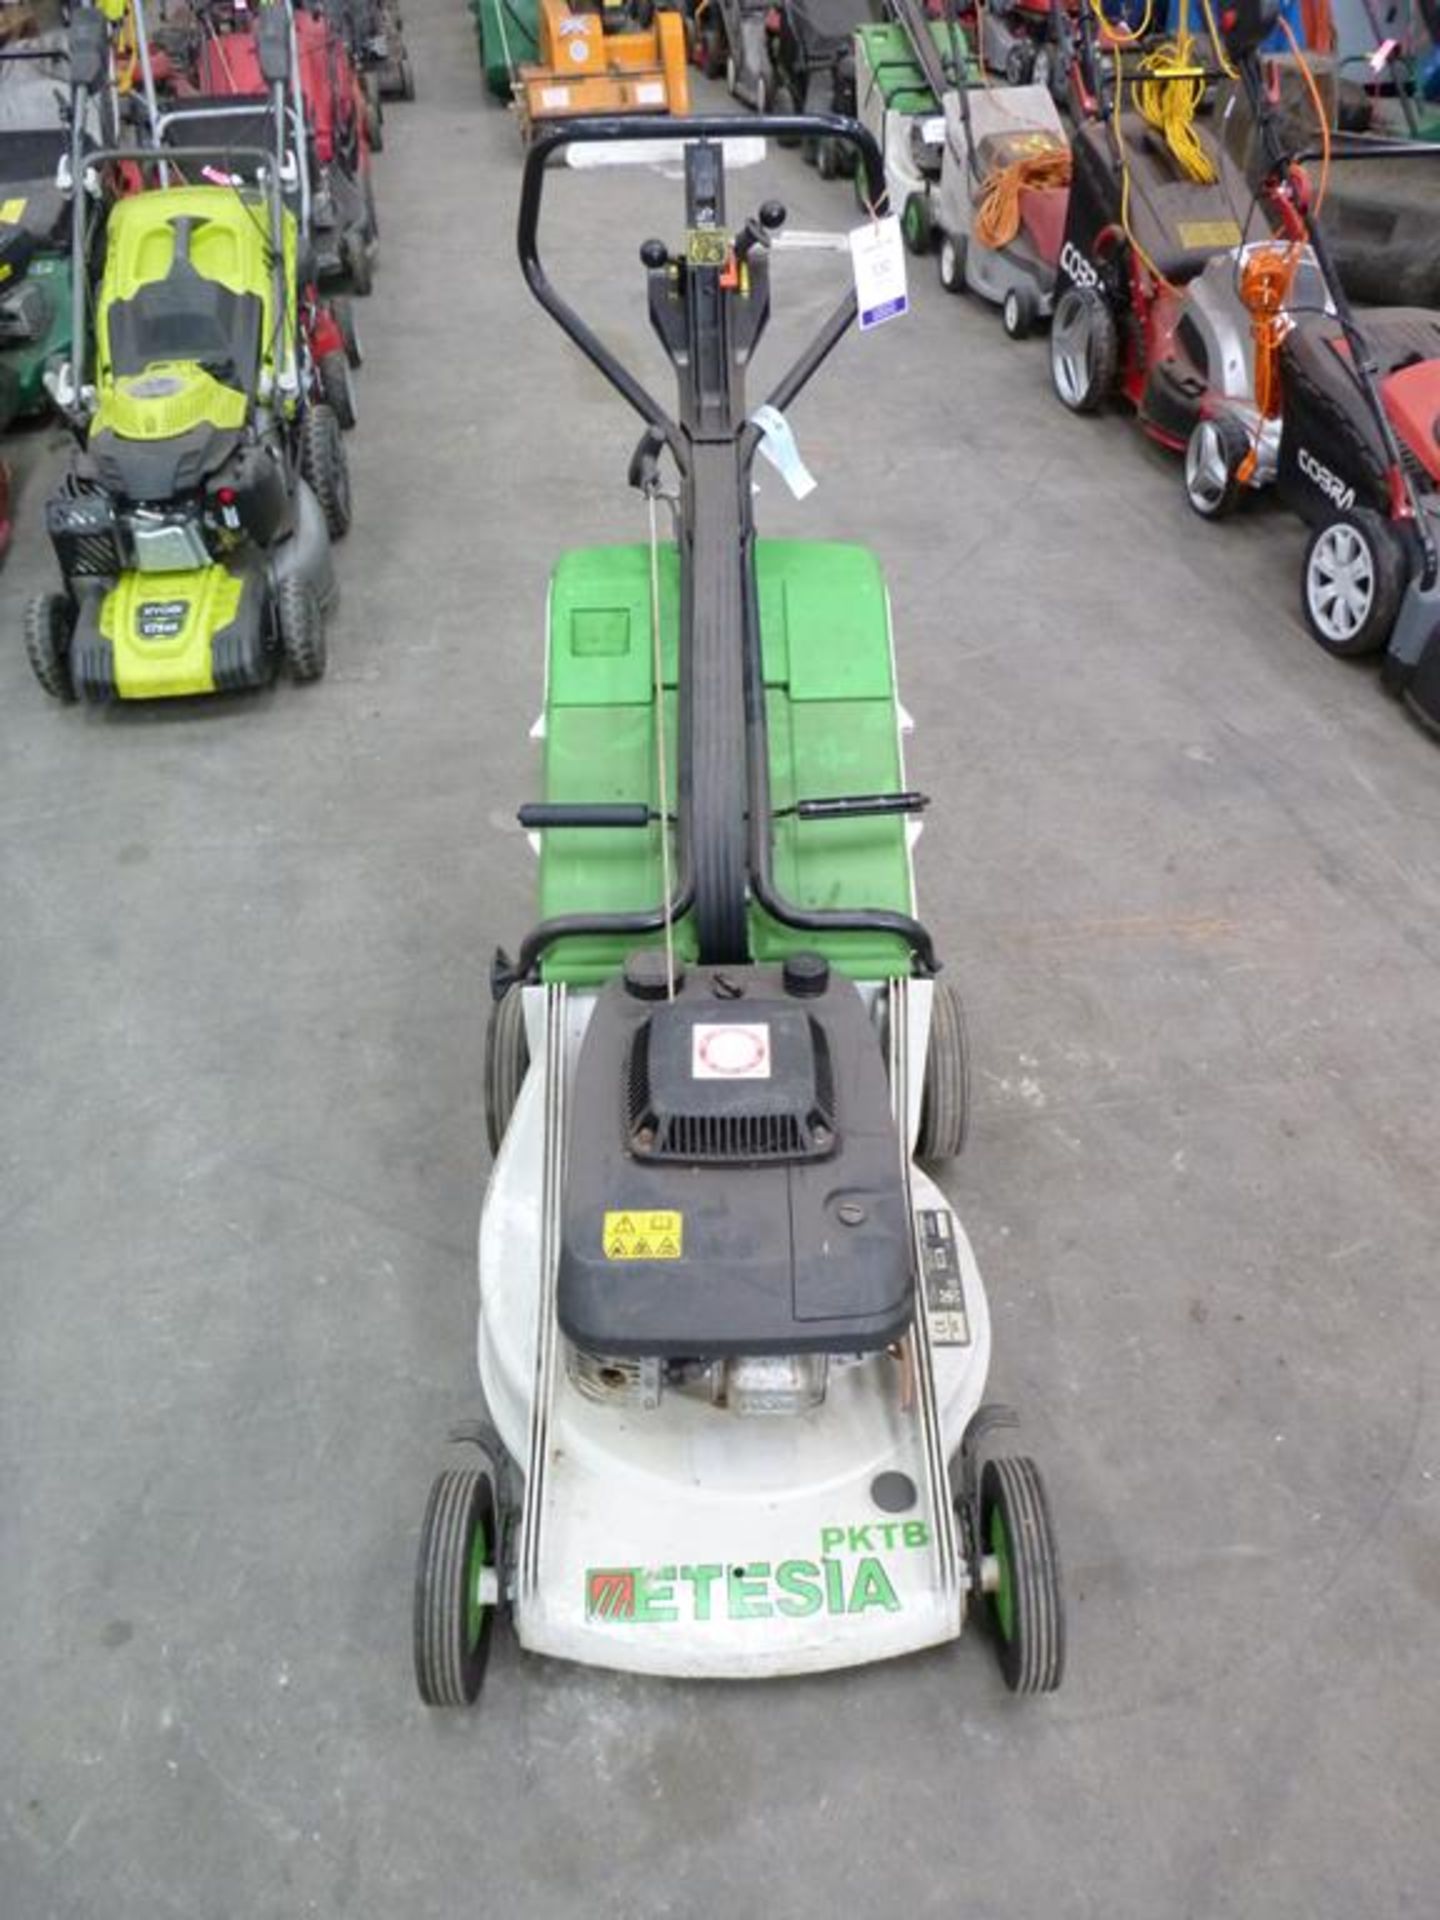 Trade In Etesia PKTB F-67160 Petrol Powered OHV Engine Lawnmower - Image 3 of 3